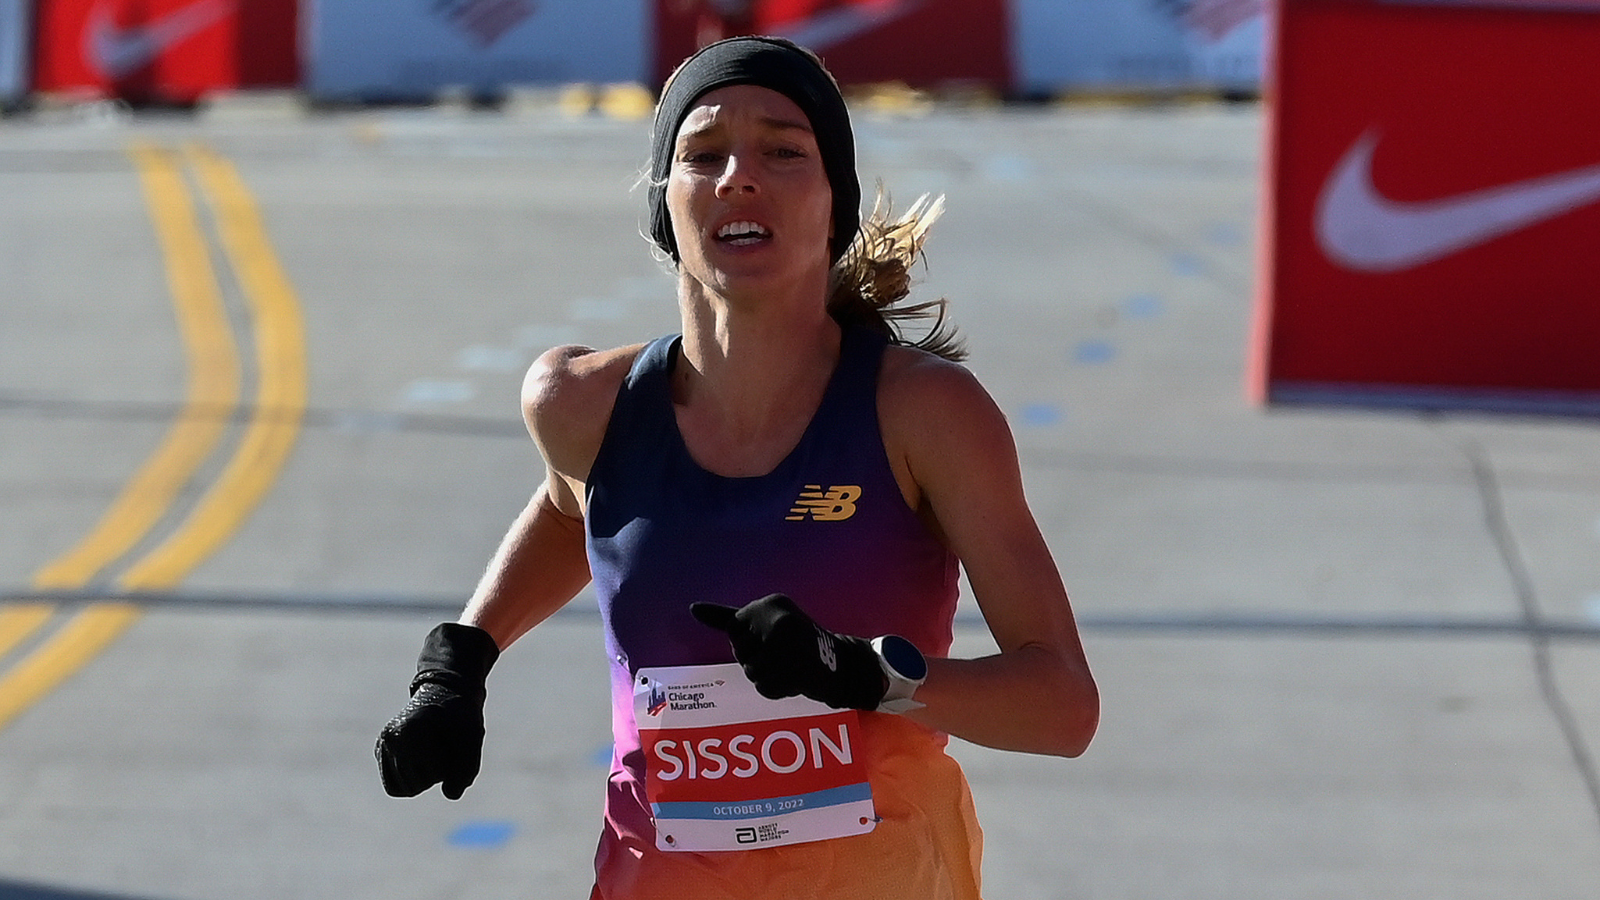 Emily Sisson qualifies for second Olympics in Marathon – a testament to dedication and talent